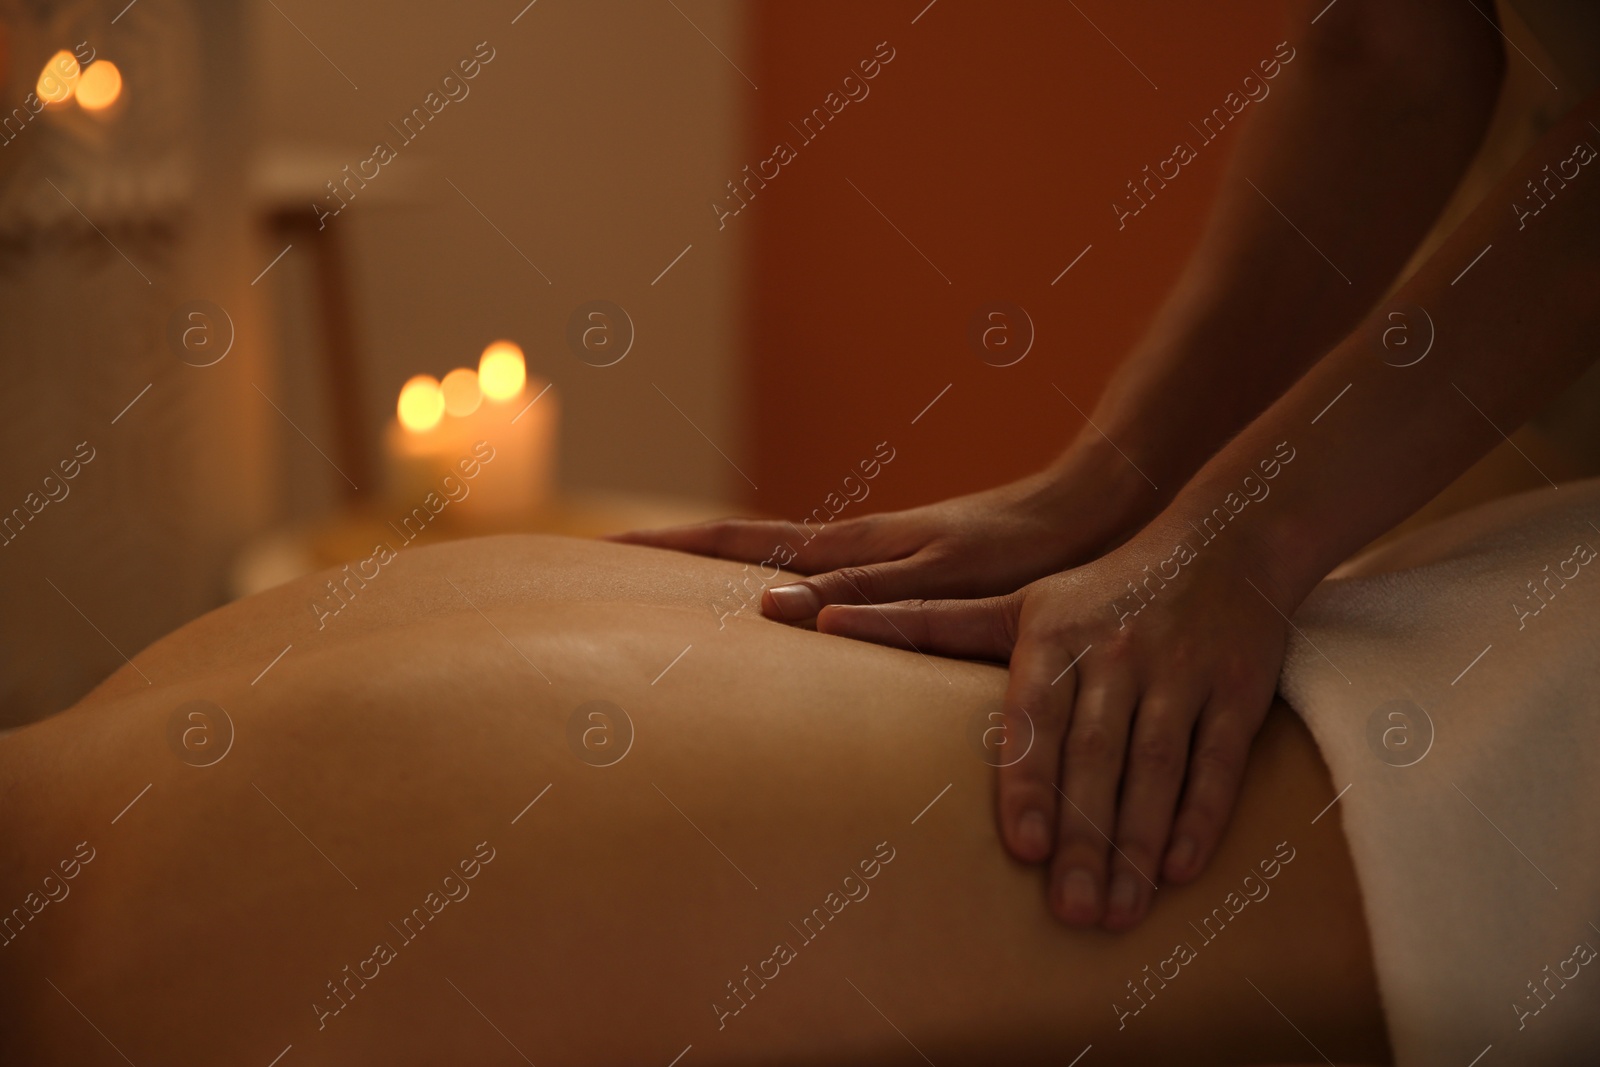 Photo of Young woman receiving back massage in spa salon, closeup